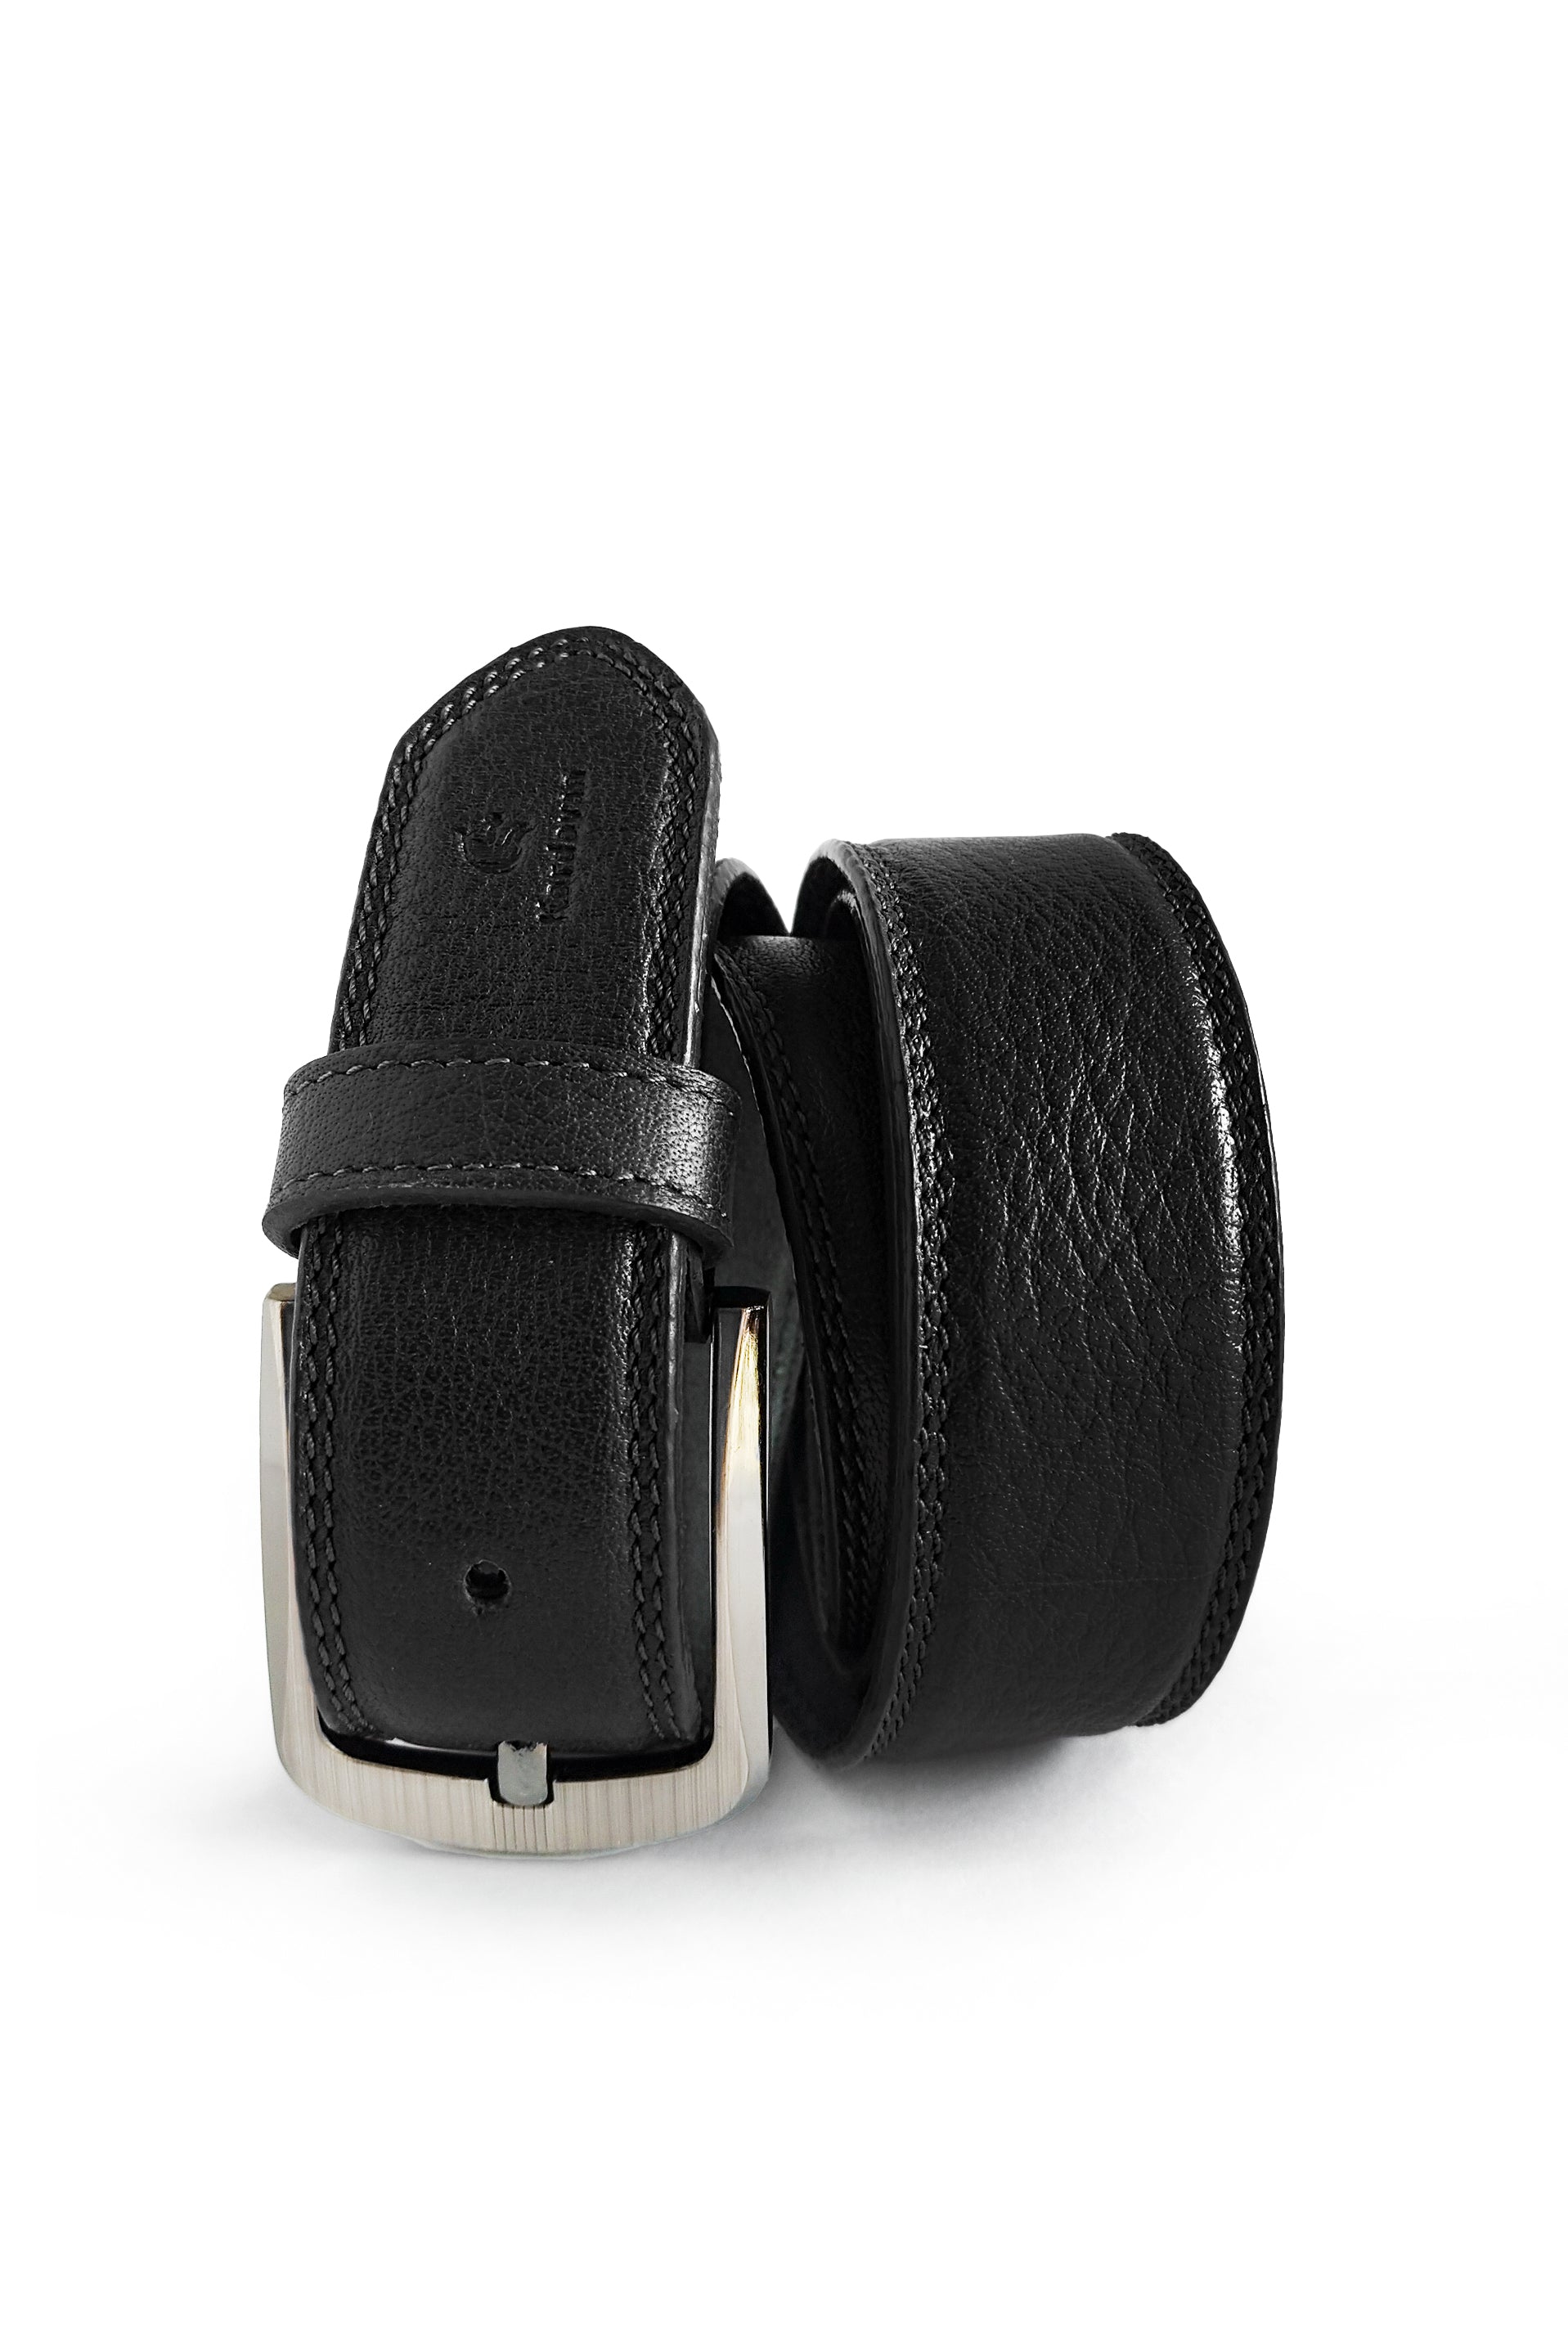 The Executive Double Stitched Belt